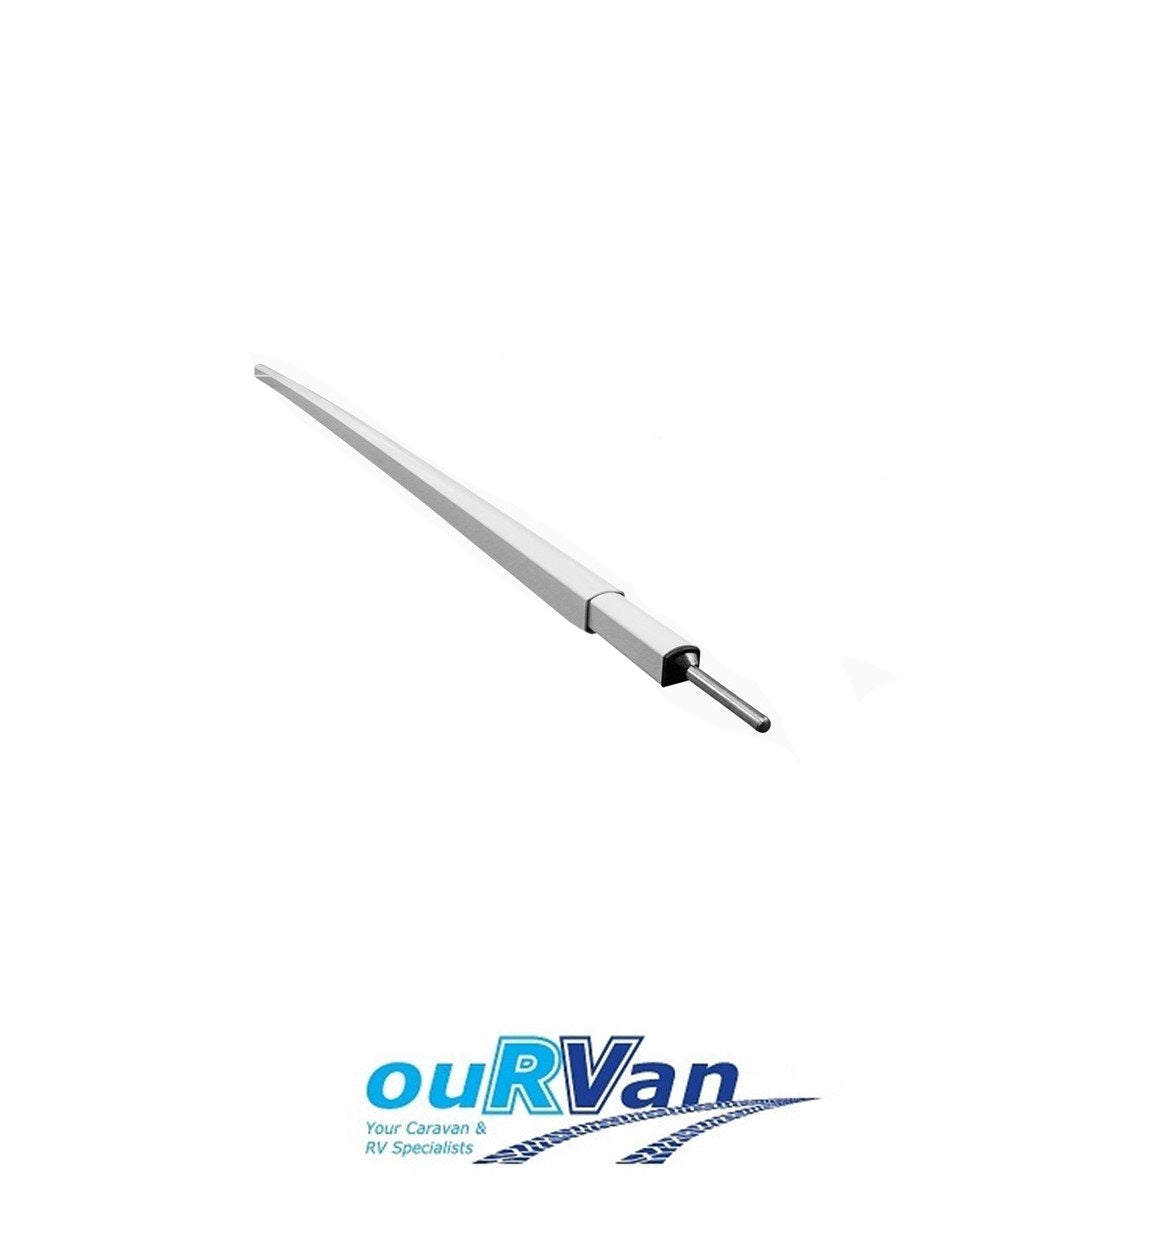 SUPEX ACUTE CYRVED CARAVAN AWNING RAFTER FOR ROLL-OUT ROOF TENSION SUPPORT